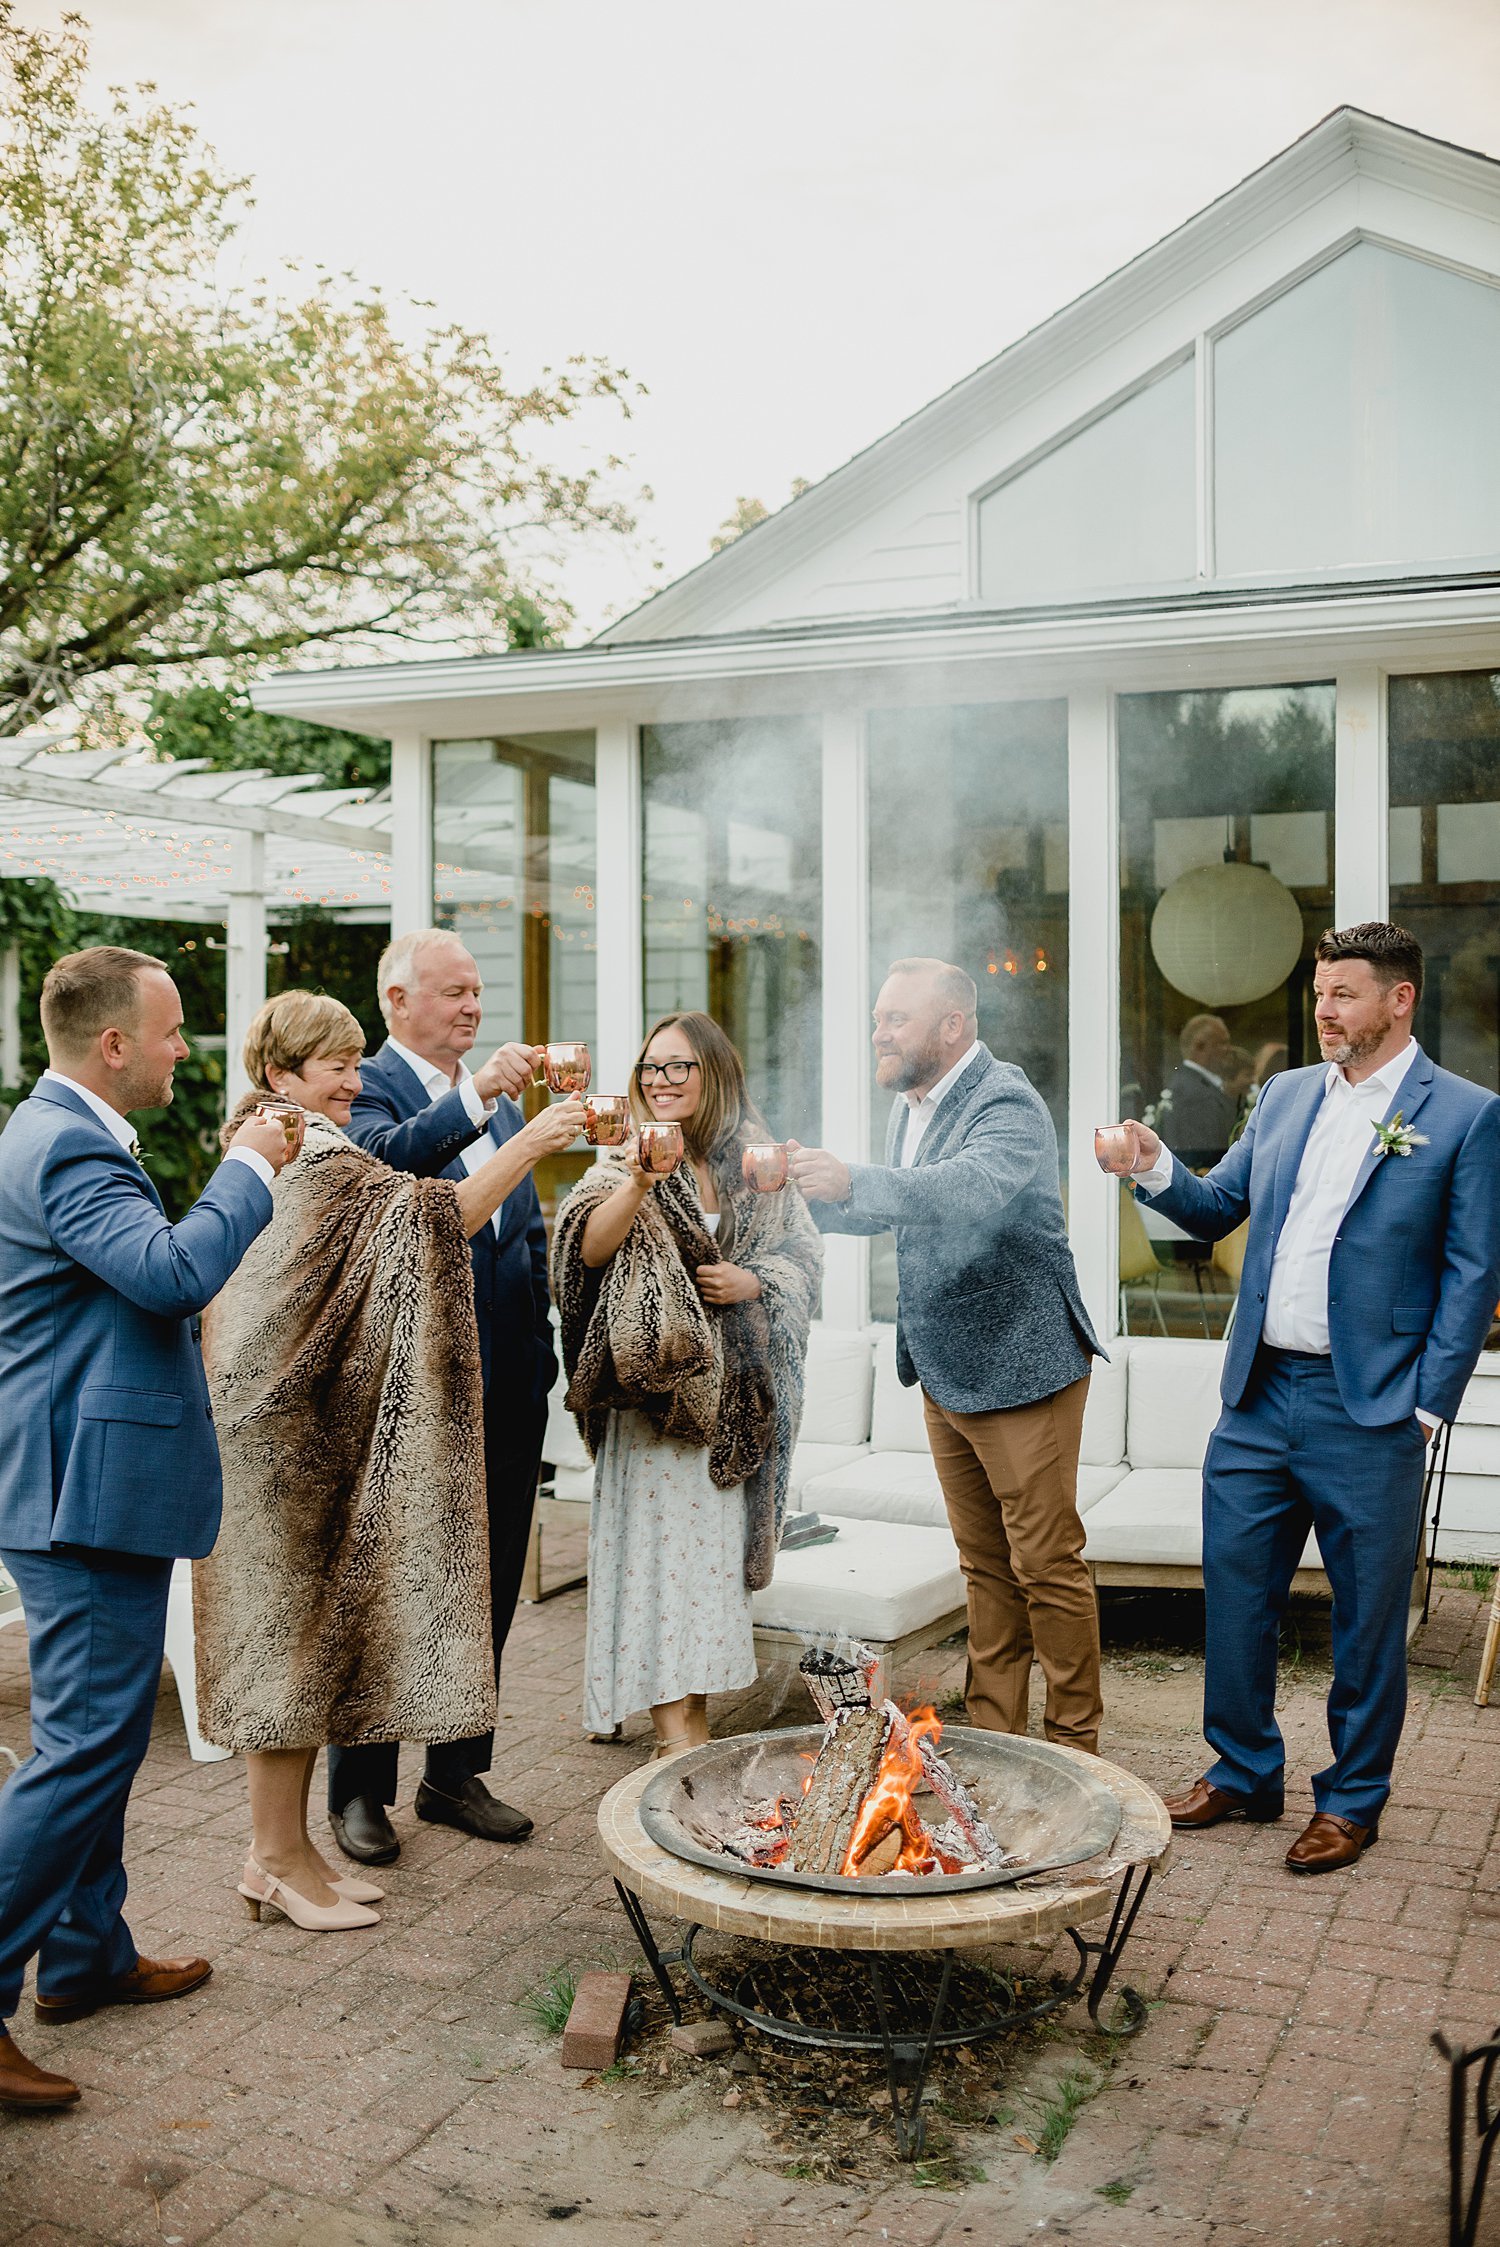 An Intimate Elopement at an Airbnb in Prince Edward County | Prince Edward County Wedding Photographer | Holly McMurter Photographs_0066.jpg